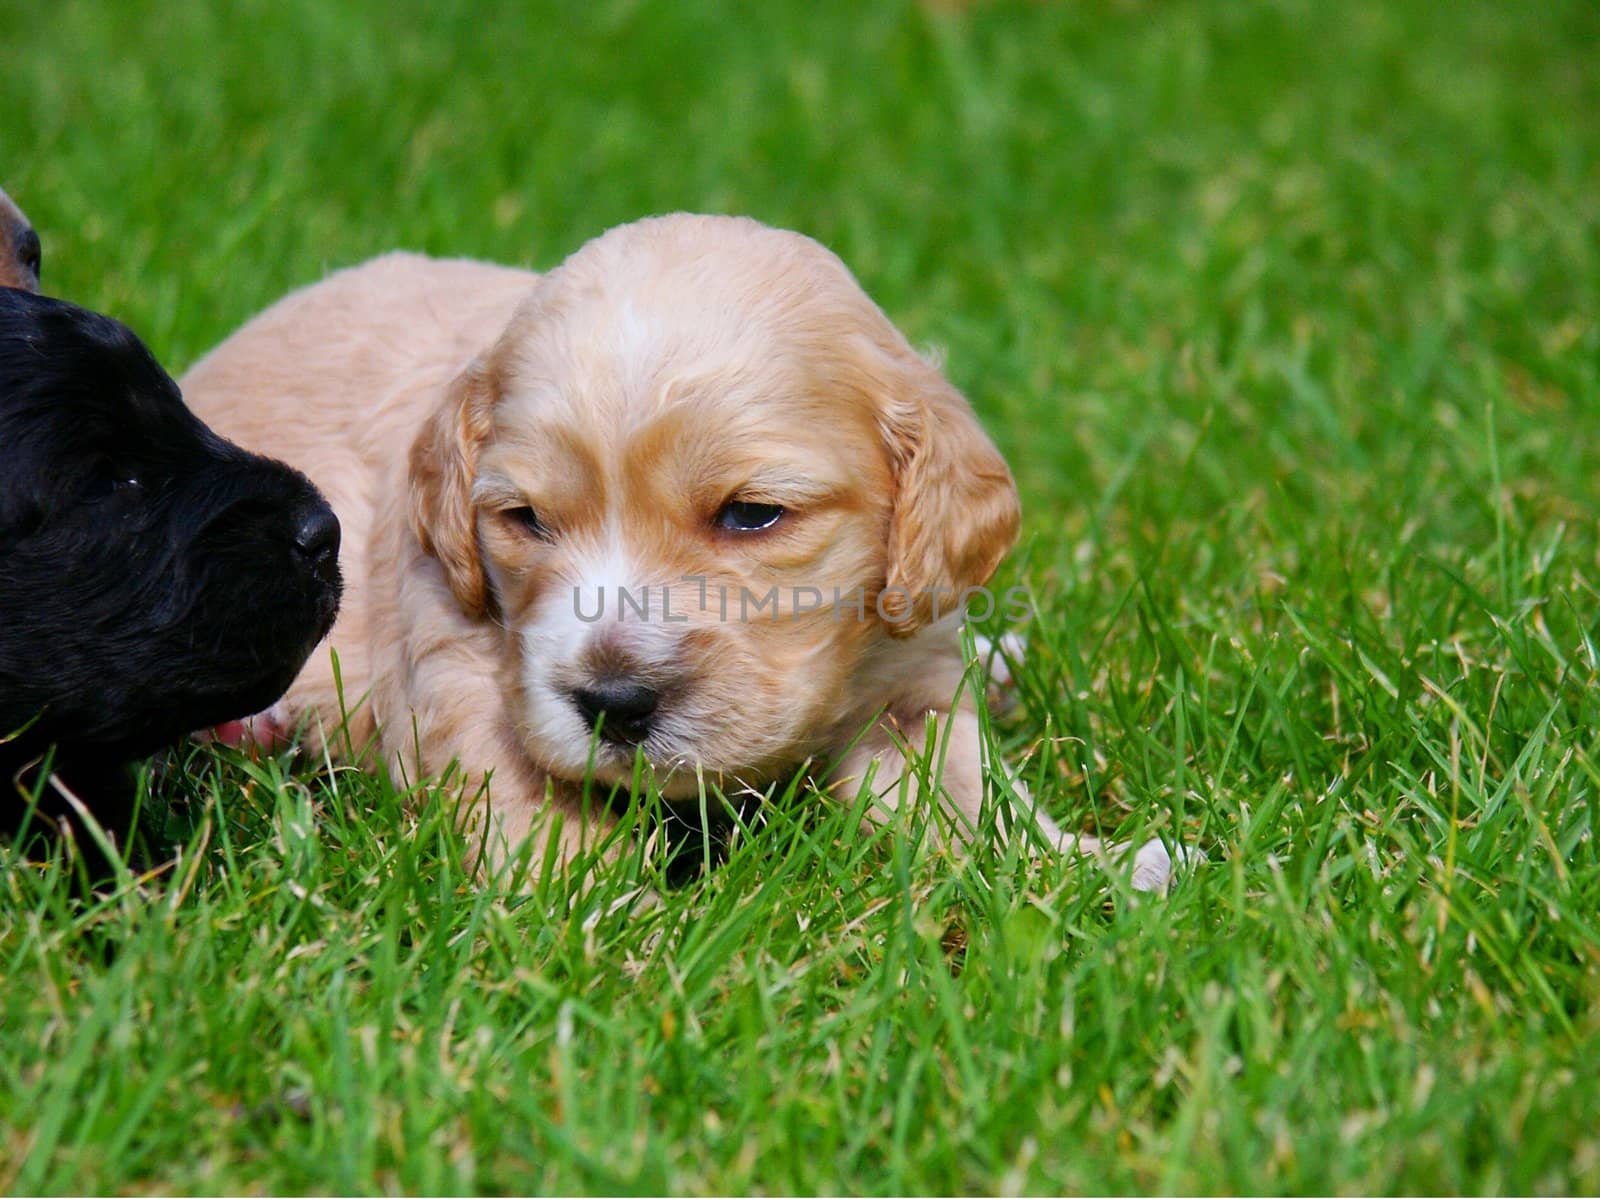 puppy on the grass, horizontally framed picture